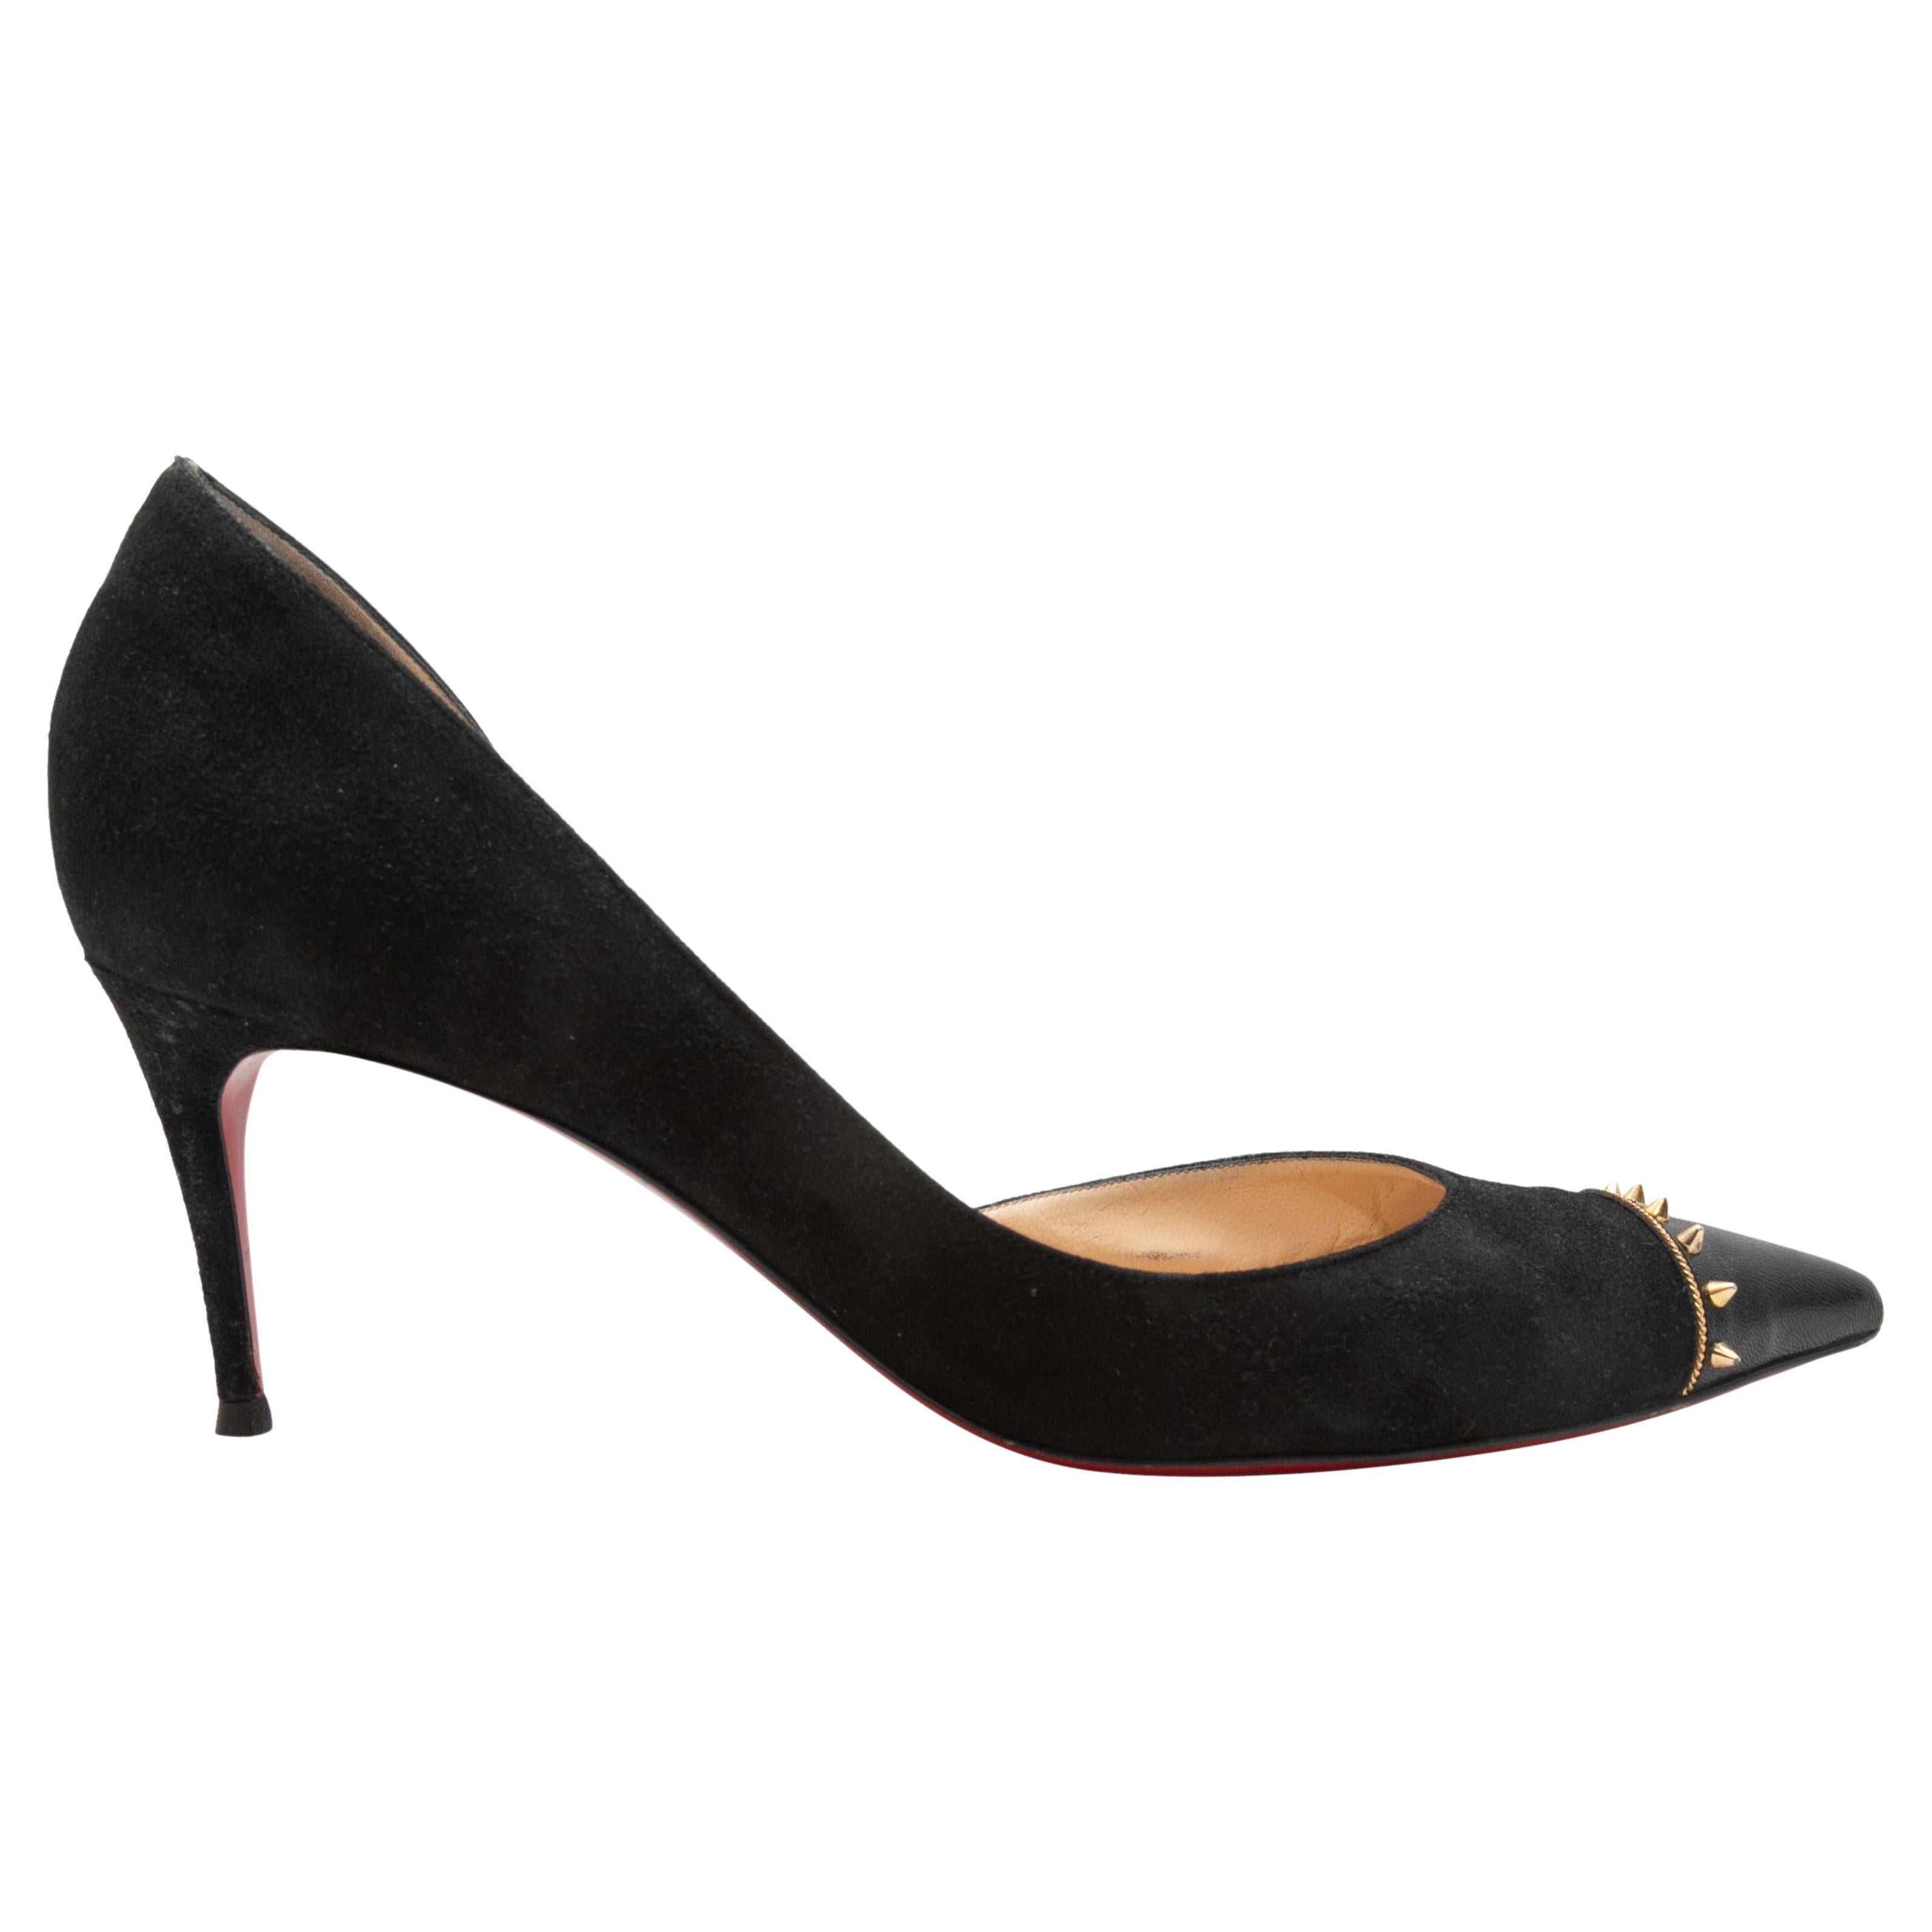 Black Christian Louboutin Suede Studded Pumps Size 39.5 For Sale